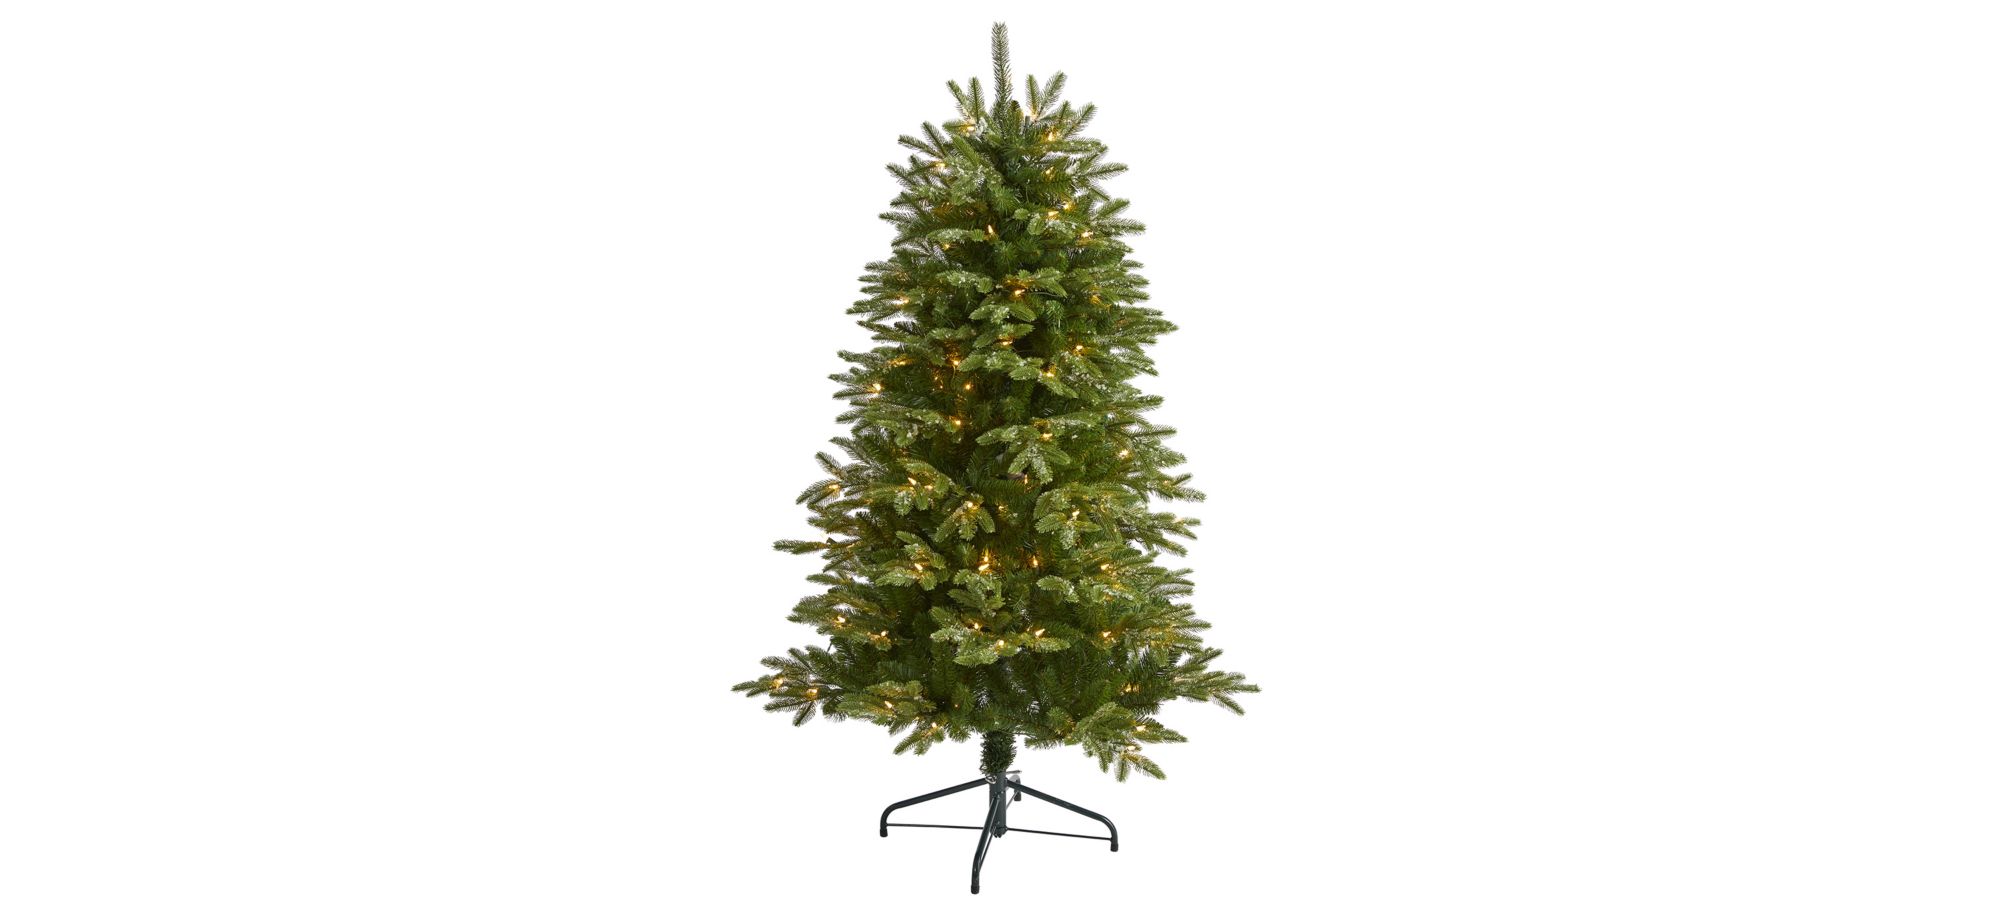 5ft. Pre-Lit Snowed Grand Teton Artificial Christmas Tree in Green by Bellanest